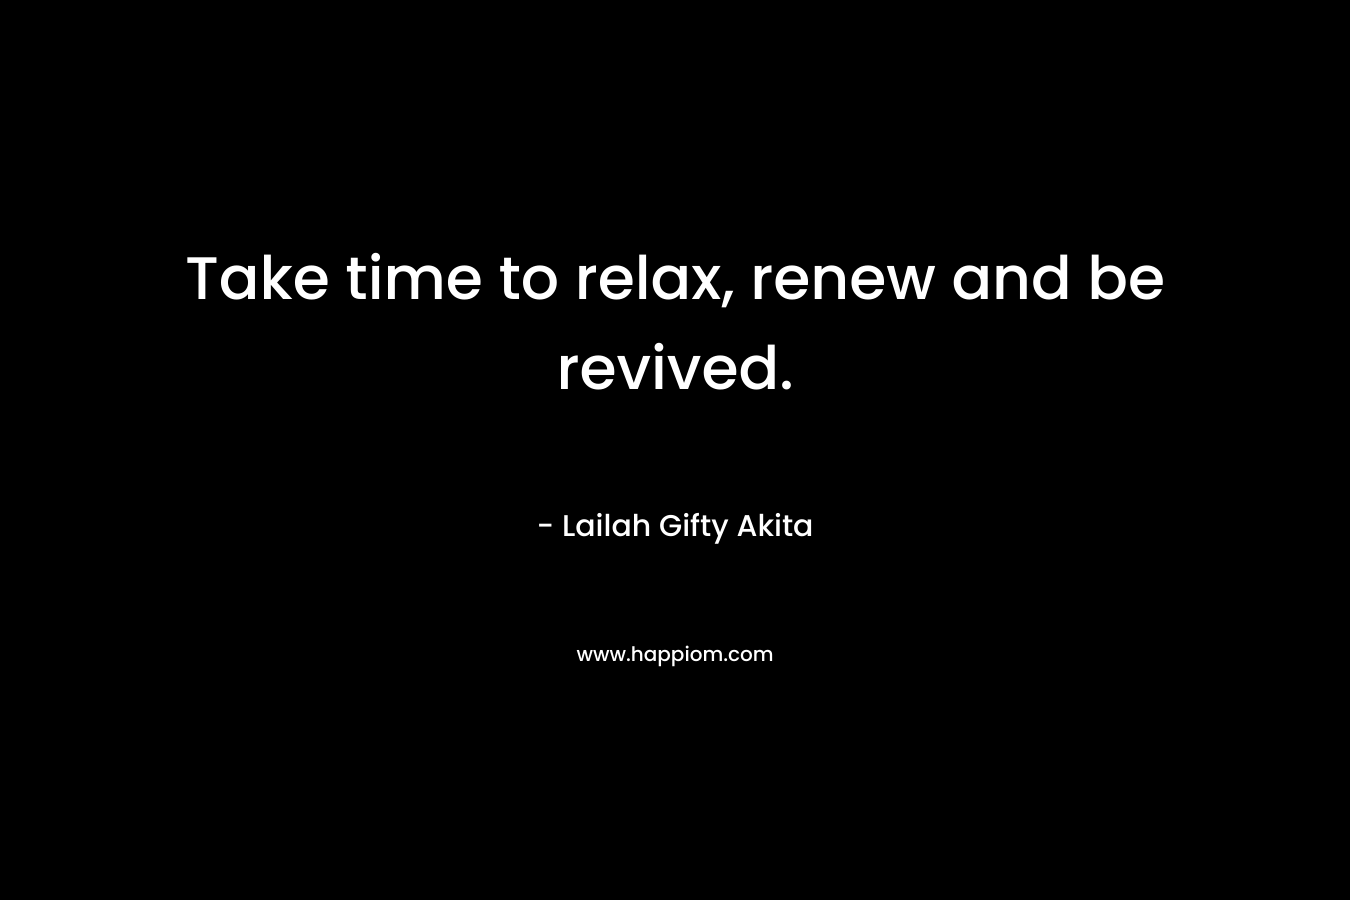 Take time to relax, renew and be revived. – Lailah Gifty Akita